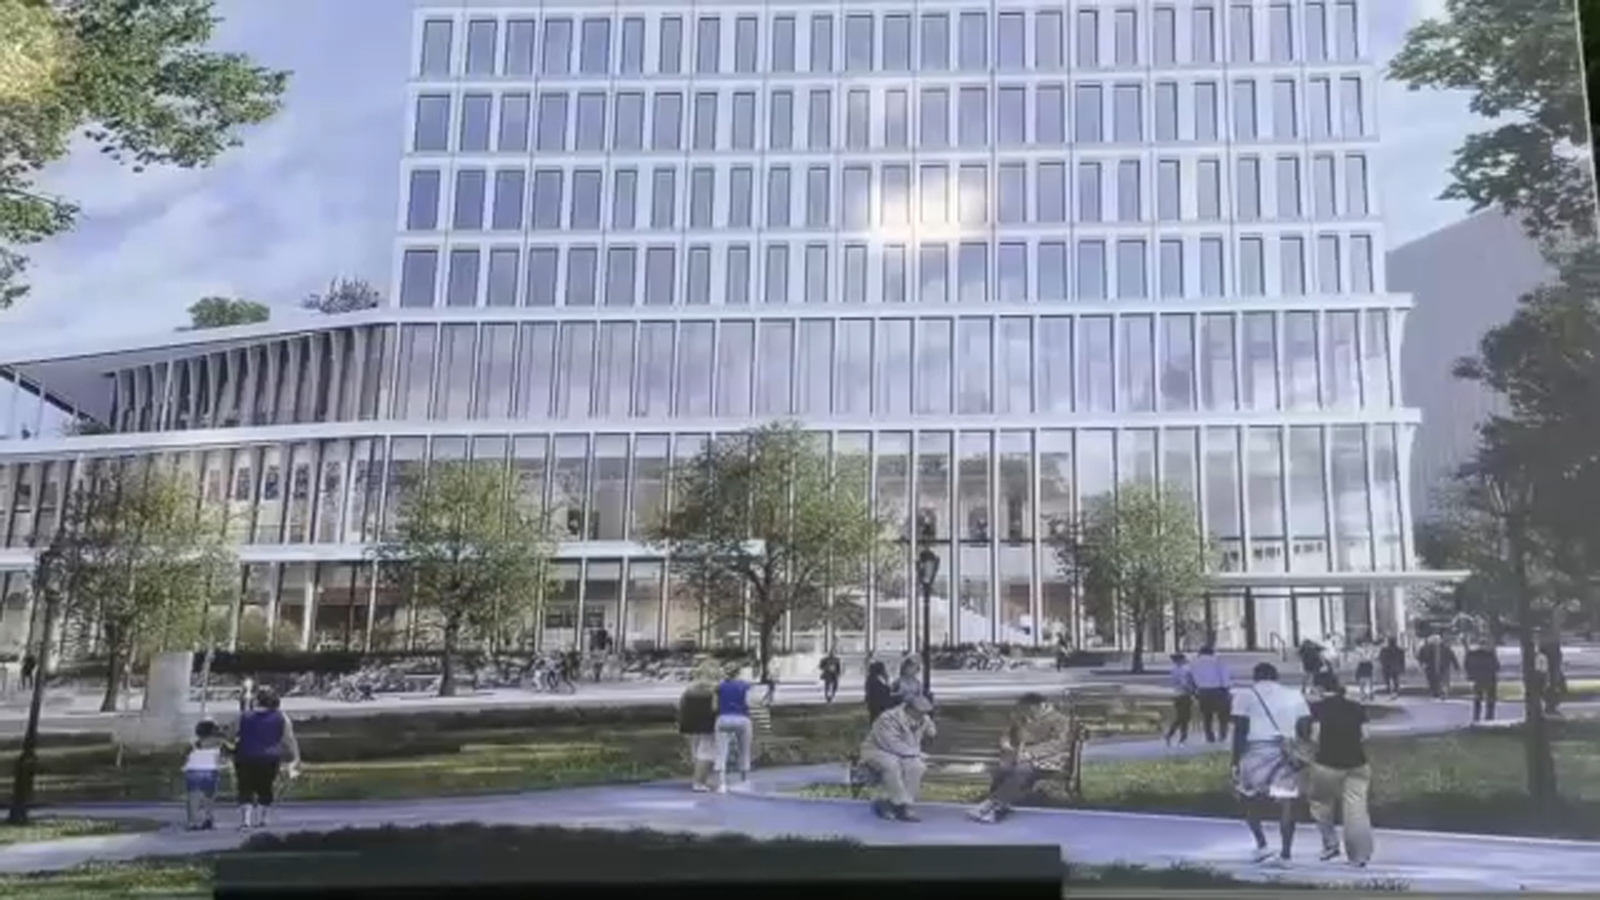 City of Raleigh breaks ground on new city hall building names East Civic Tower [Video]